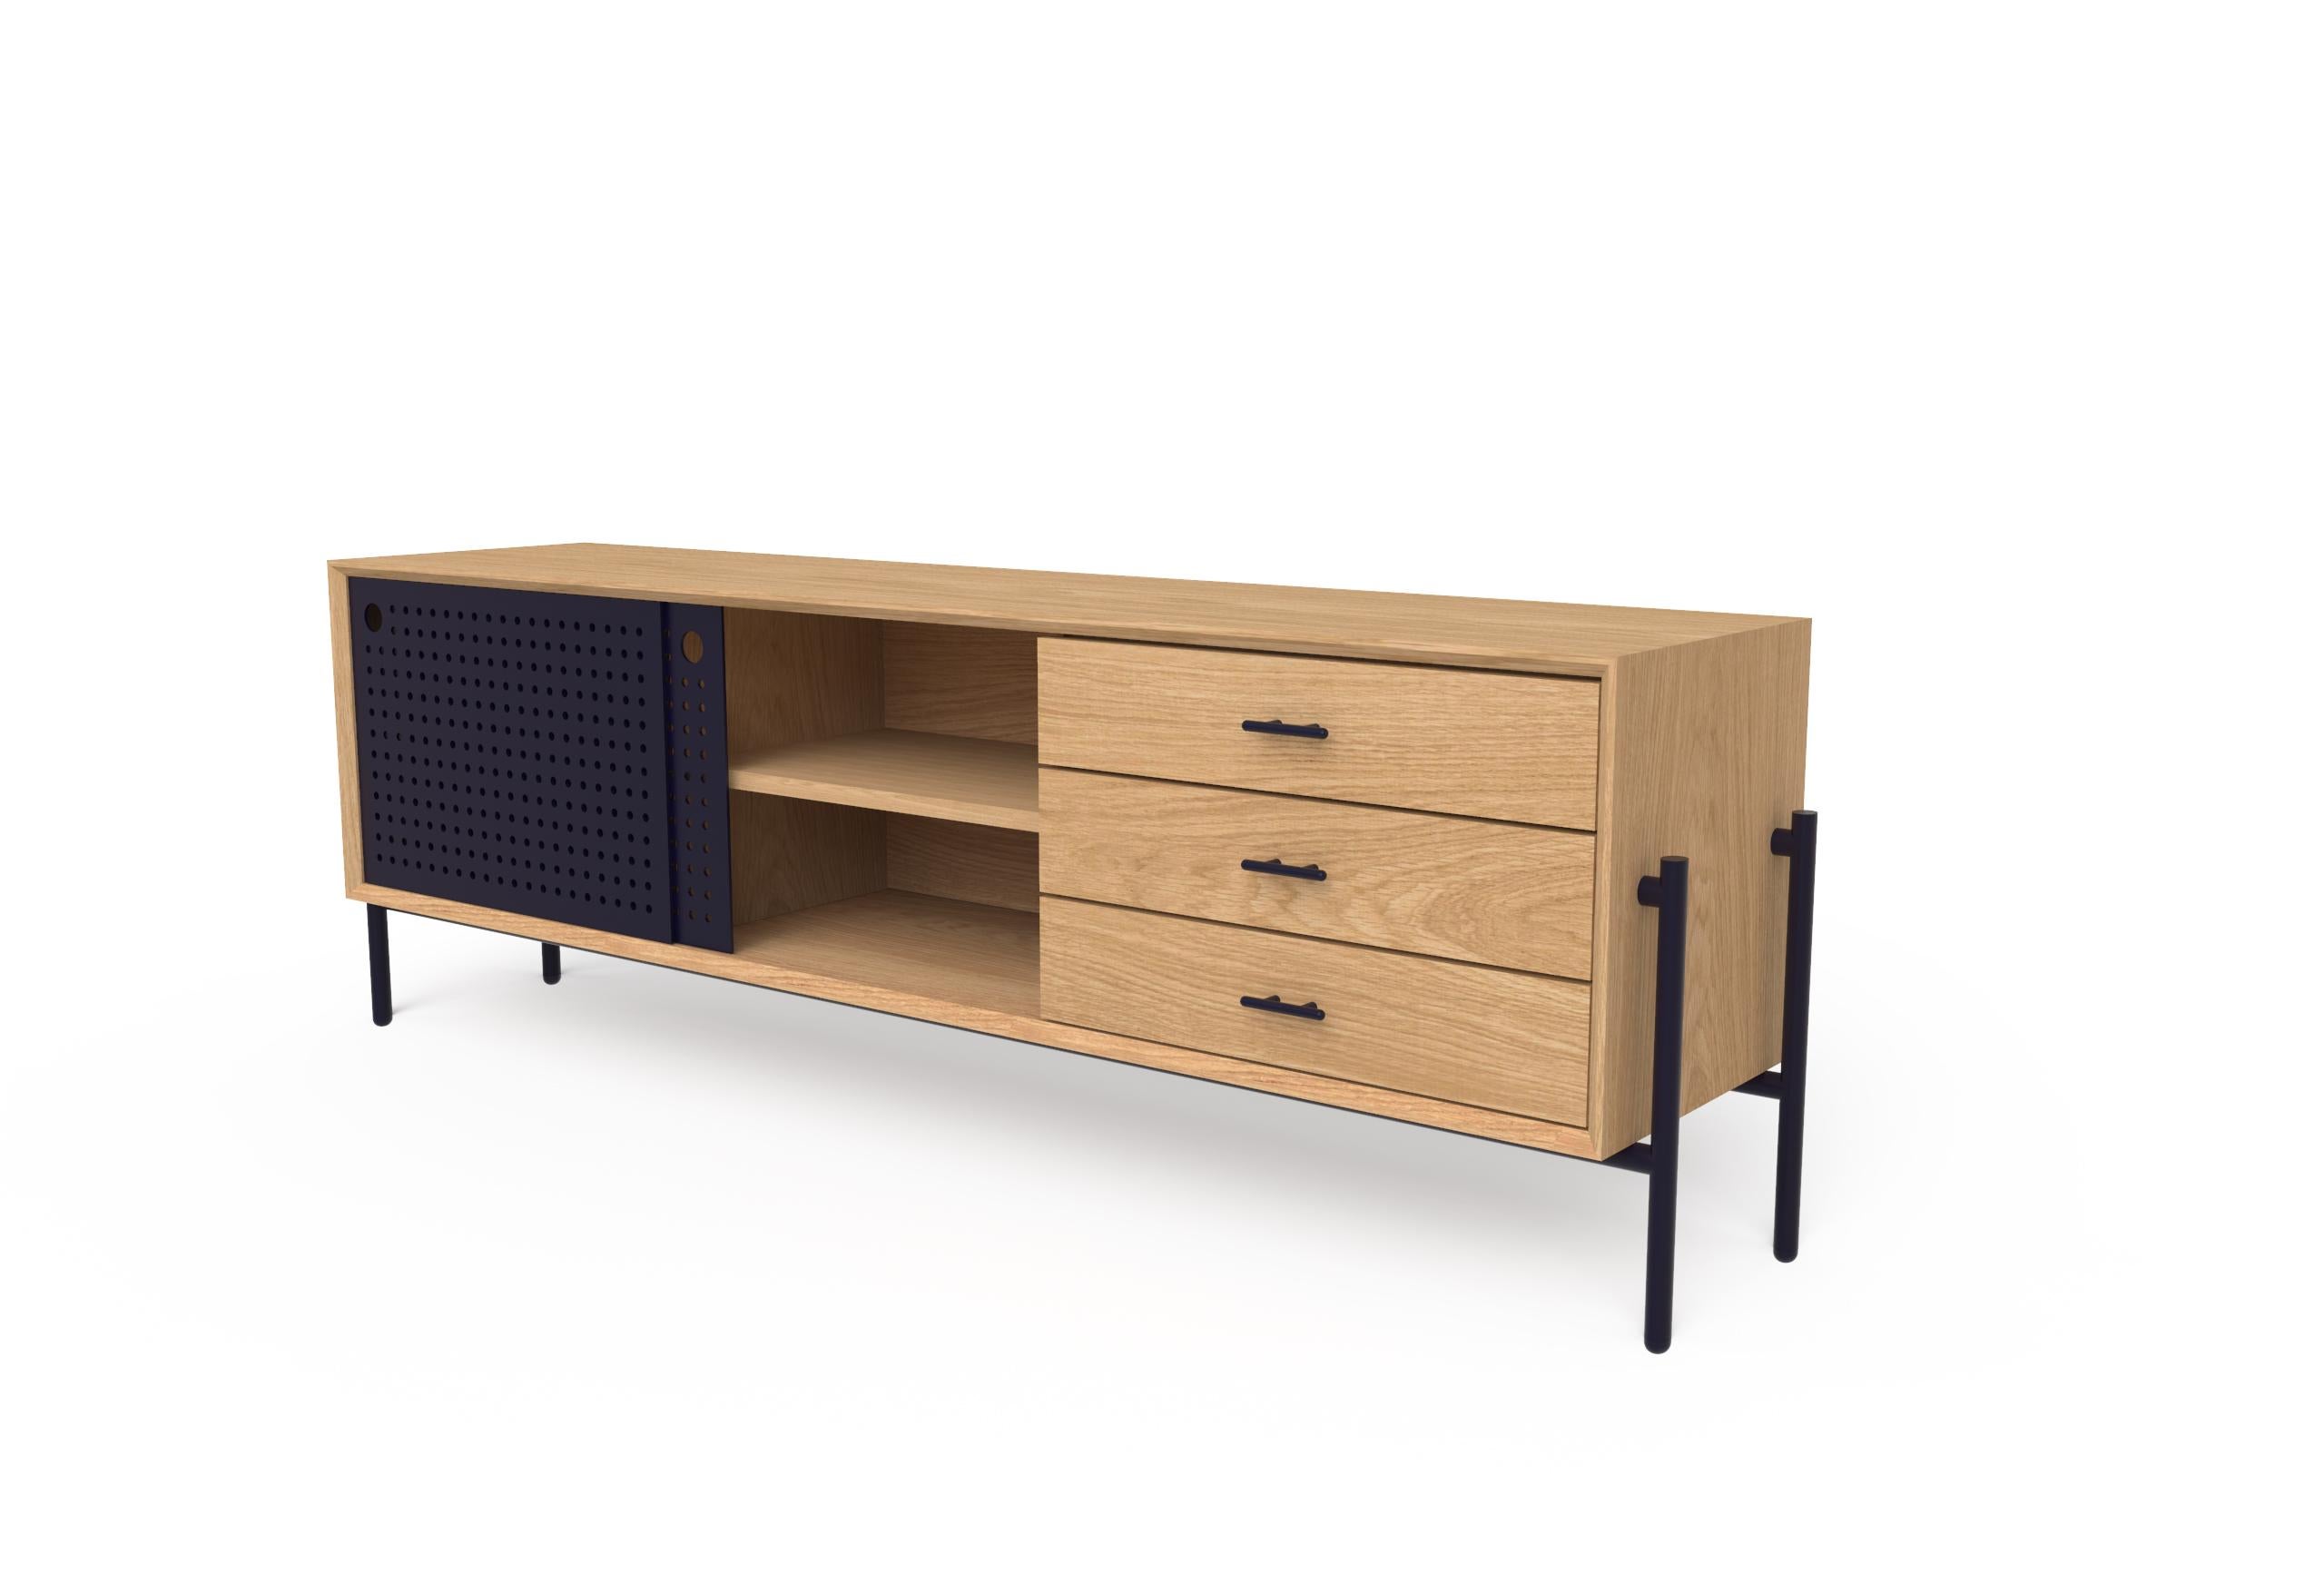 This simple and functional piece was originally conceived for TV rooms.  Its metal sliding doors have a pattern of perforations which allow for remotes to control interior devices. It's made of white oak wood and includes three drawers with metal